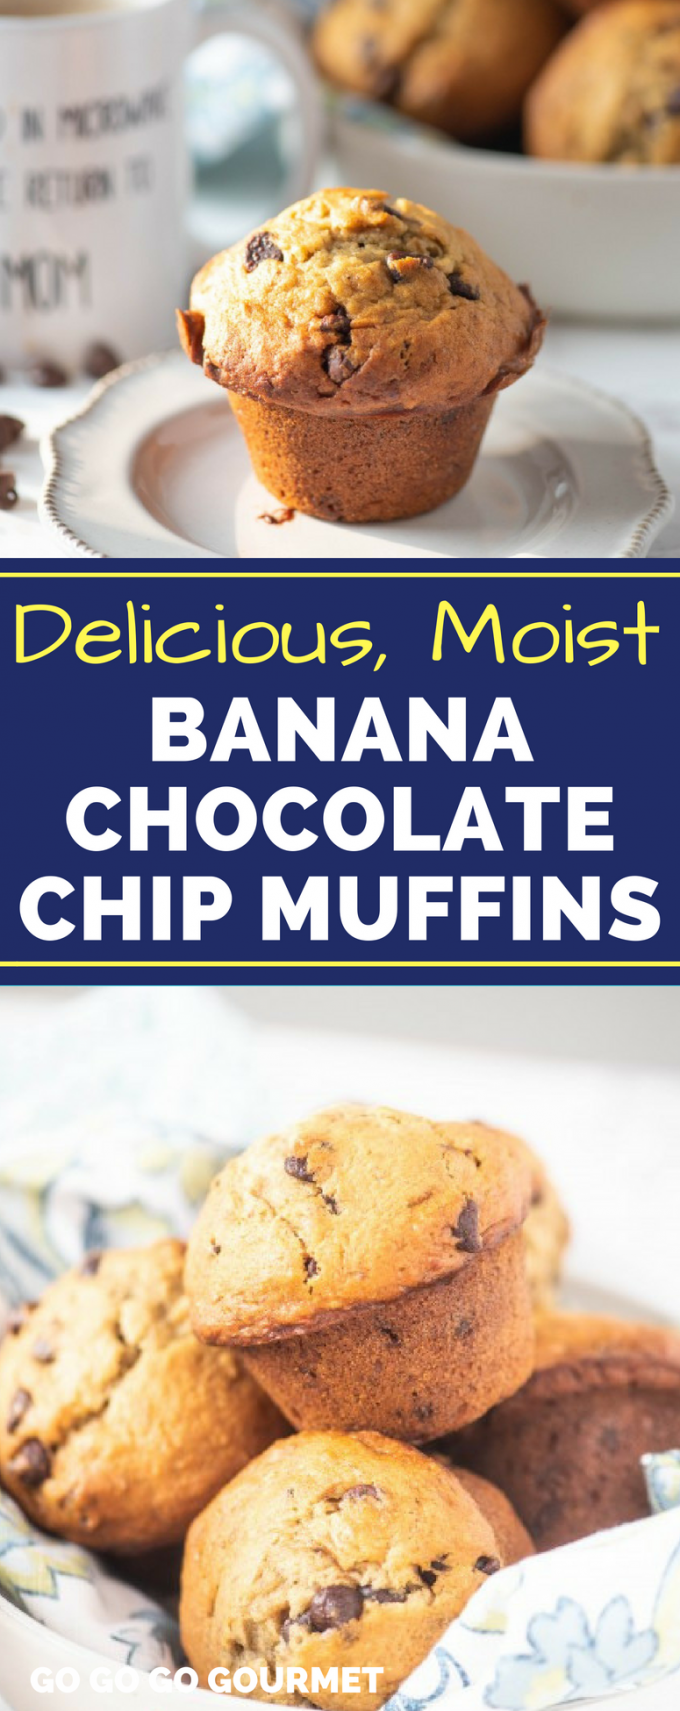 This is the best Banana Chocolate Chip Muffin recipe! Super moist and easy to make, these muffins are perfect for breakfast, brunch or even an afternoon snack! #bananachocolatechipmuffins #easybrunchrecipes #easymuffinrecipes #gogogogourmet via @gogogogourmet